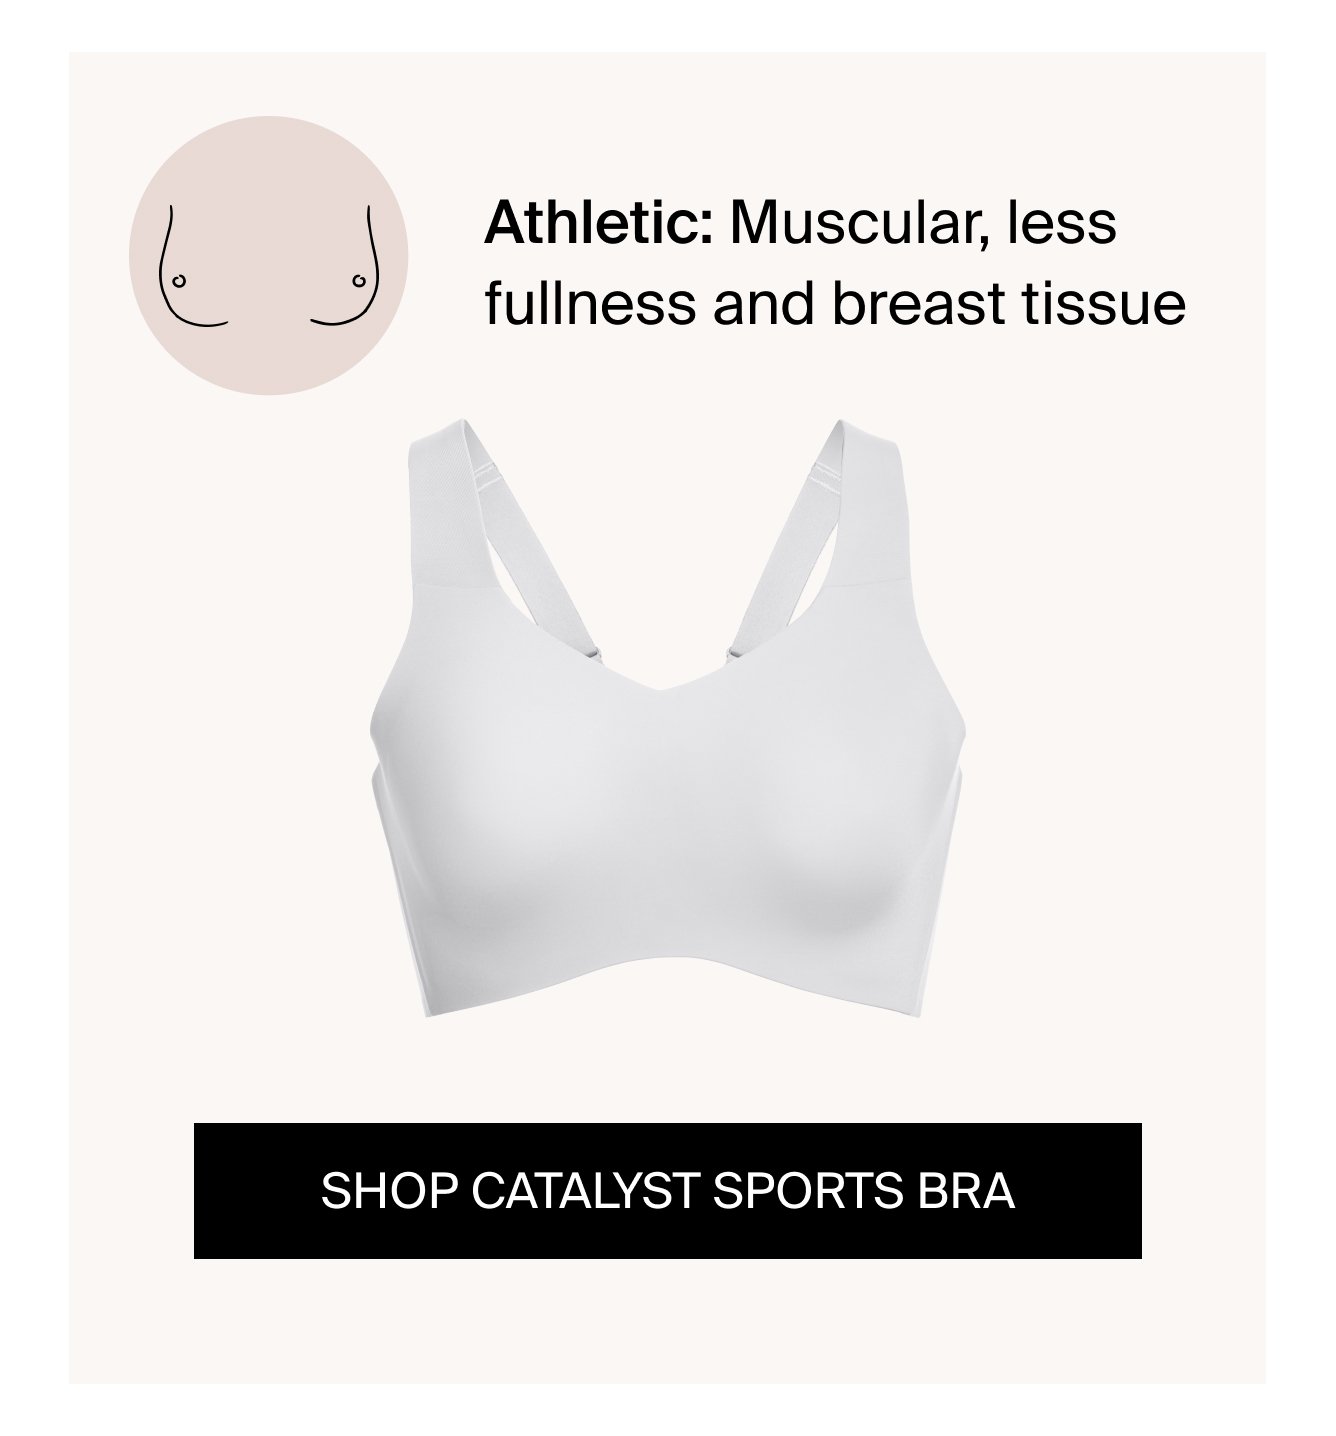 Athletic: Muscular, less fullness and breast tissue. Shop Catalyst Sports Bra